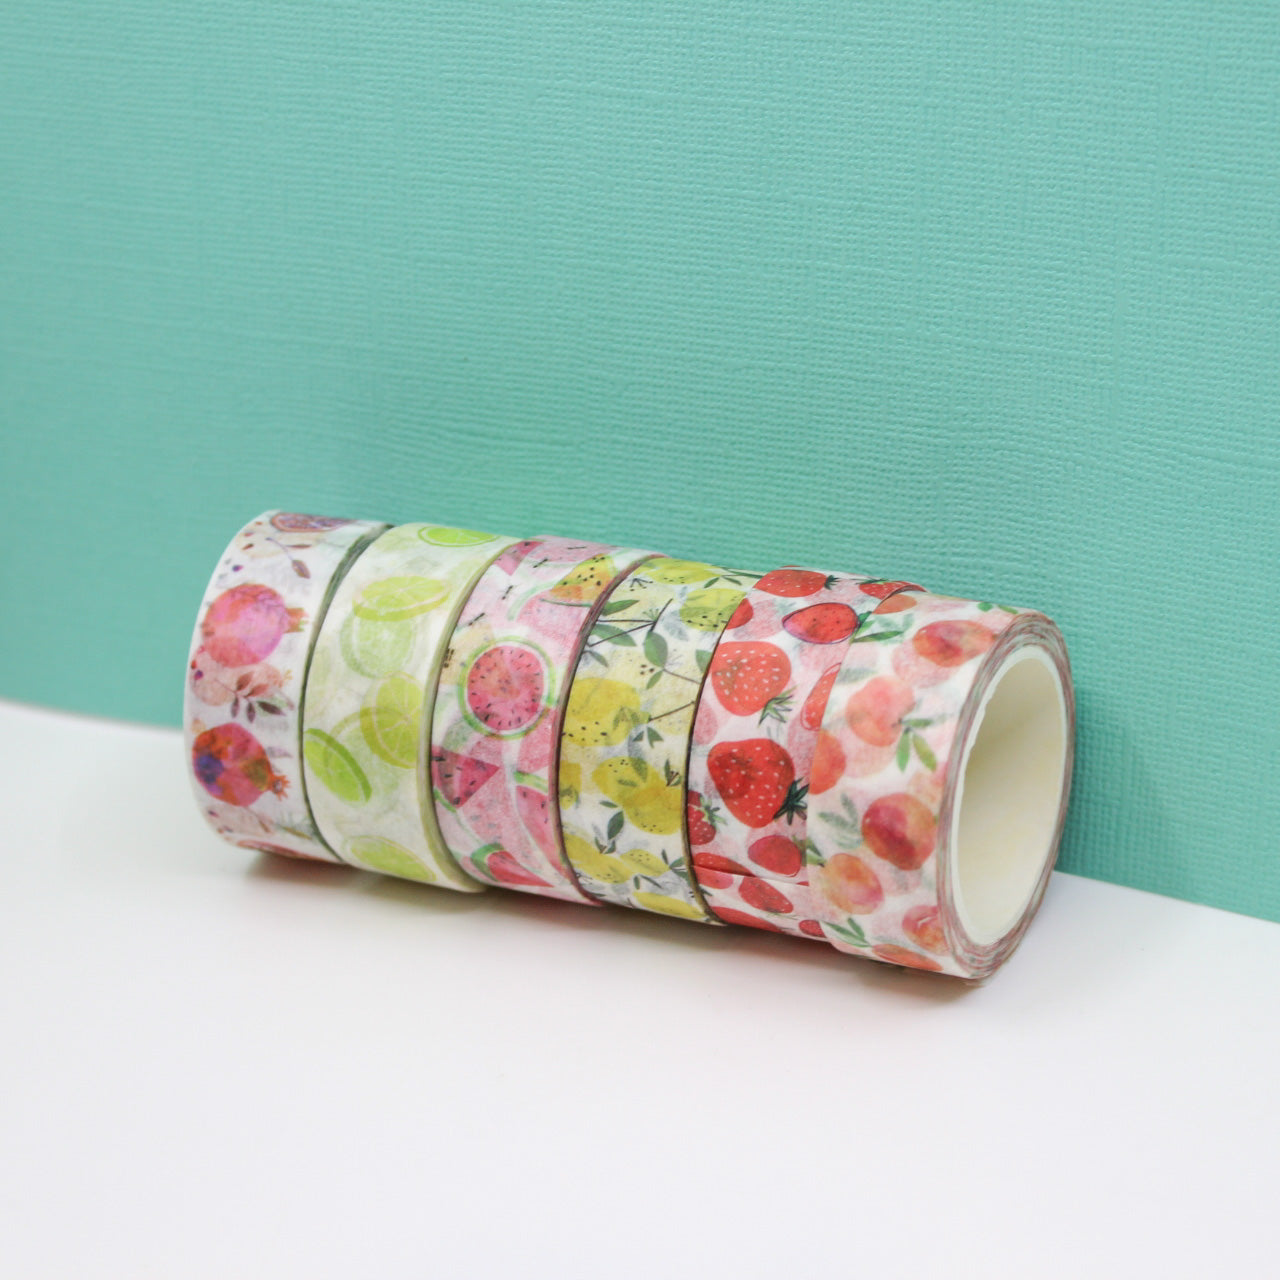 Infuse your projects with the beauty of nature using our washi tape, adorned with fruit illustrations that evoke a sense of summer and abundance, adding a lively and refreshing element to your crafts. These tapes are sold at BBB Supplies Craft Shop.